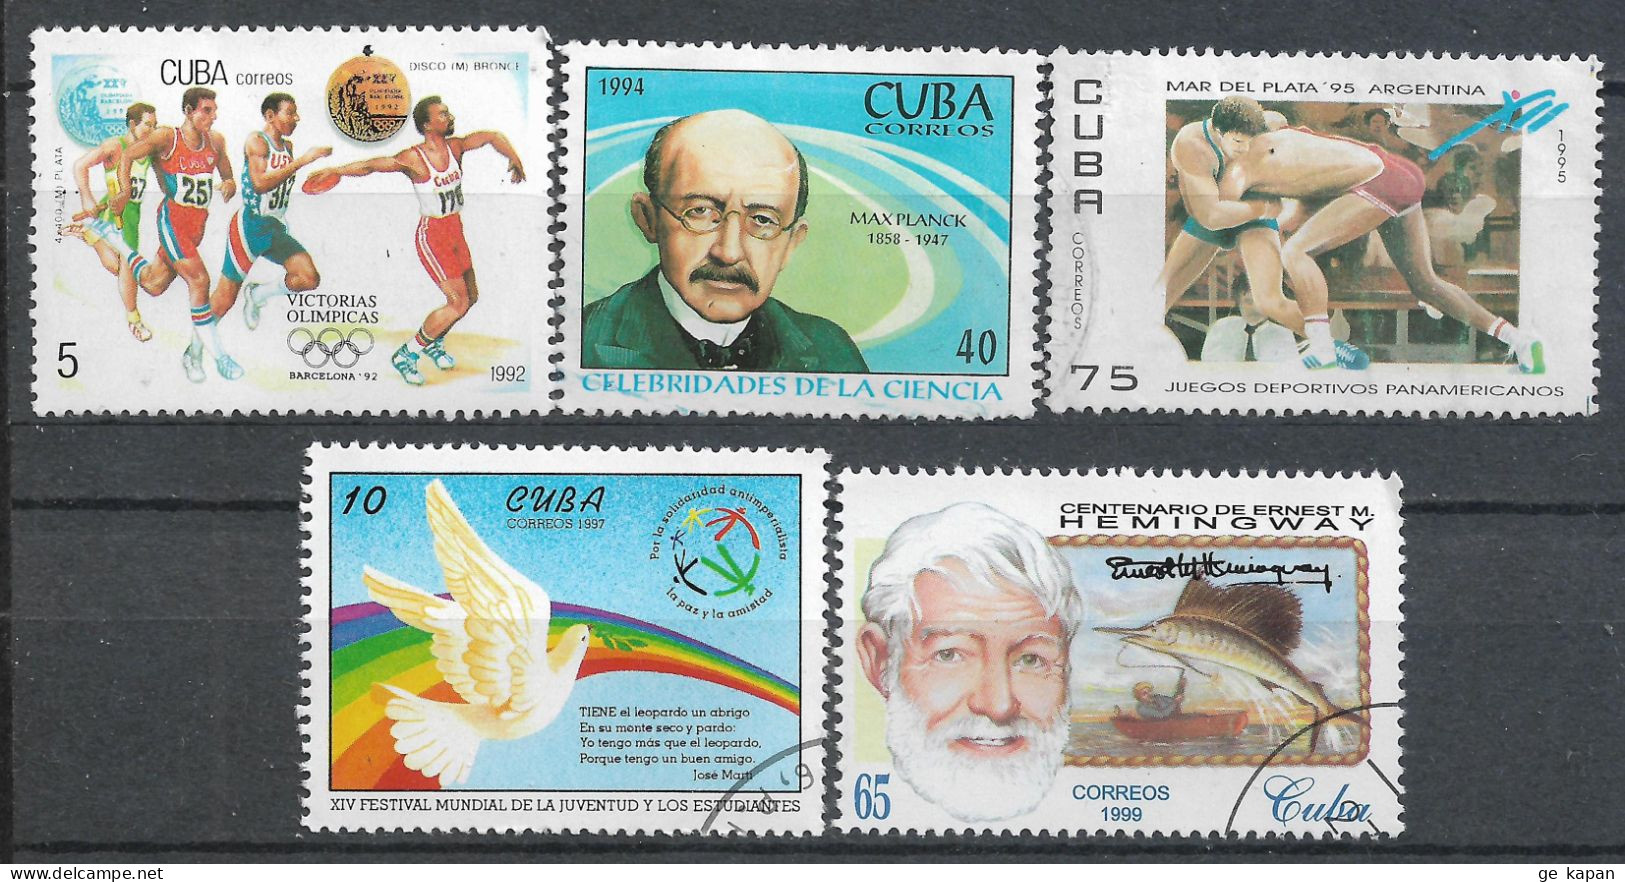 1992-1999 CUBA Set Of 5 Used Stamps (Michel # 3615,3762,3805,4022,4251) CV €3.80 - Used Stamps